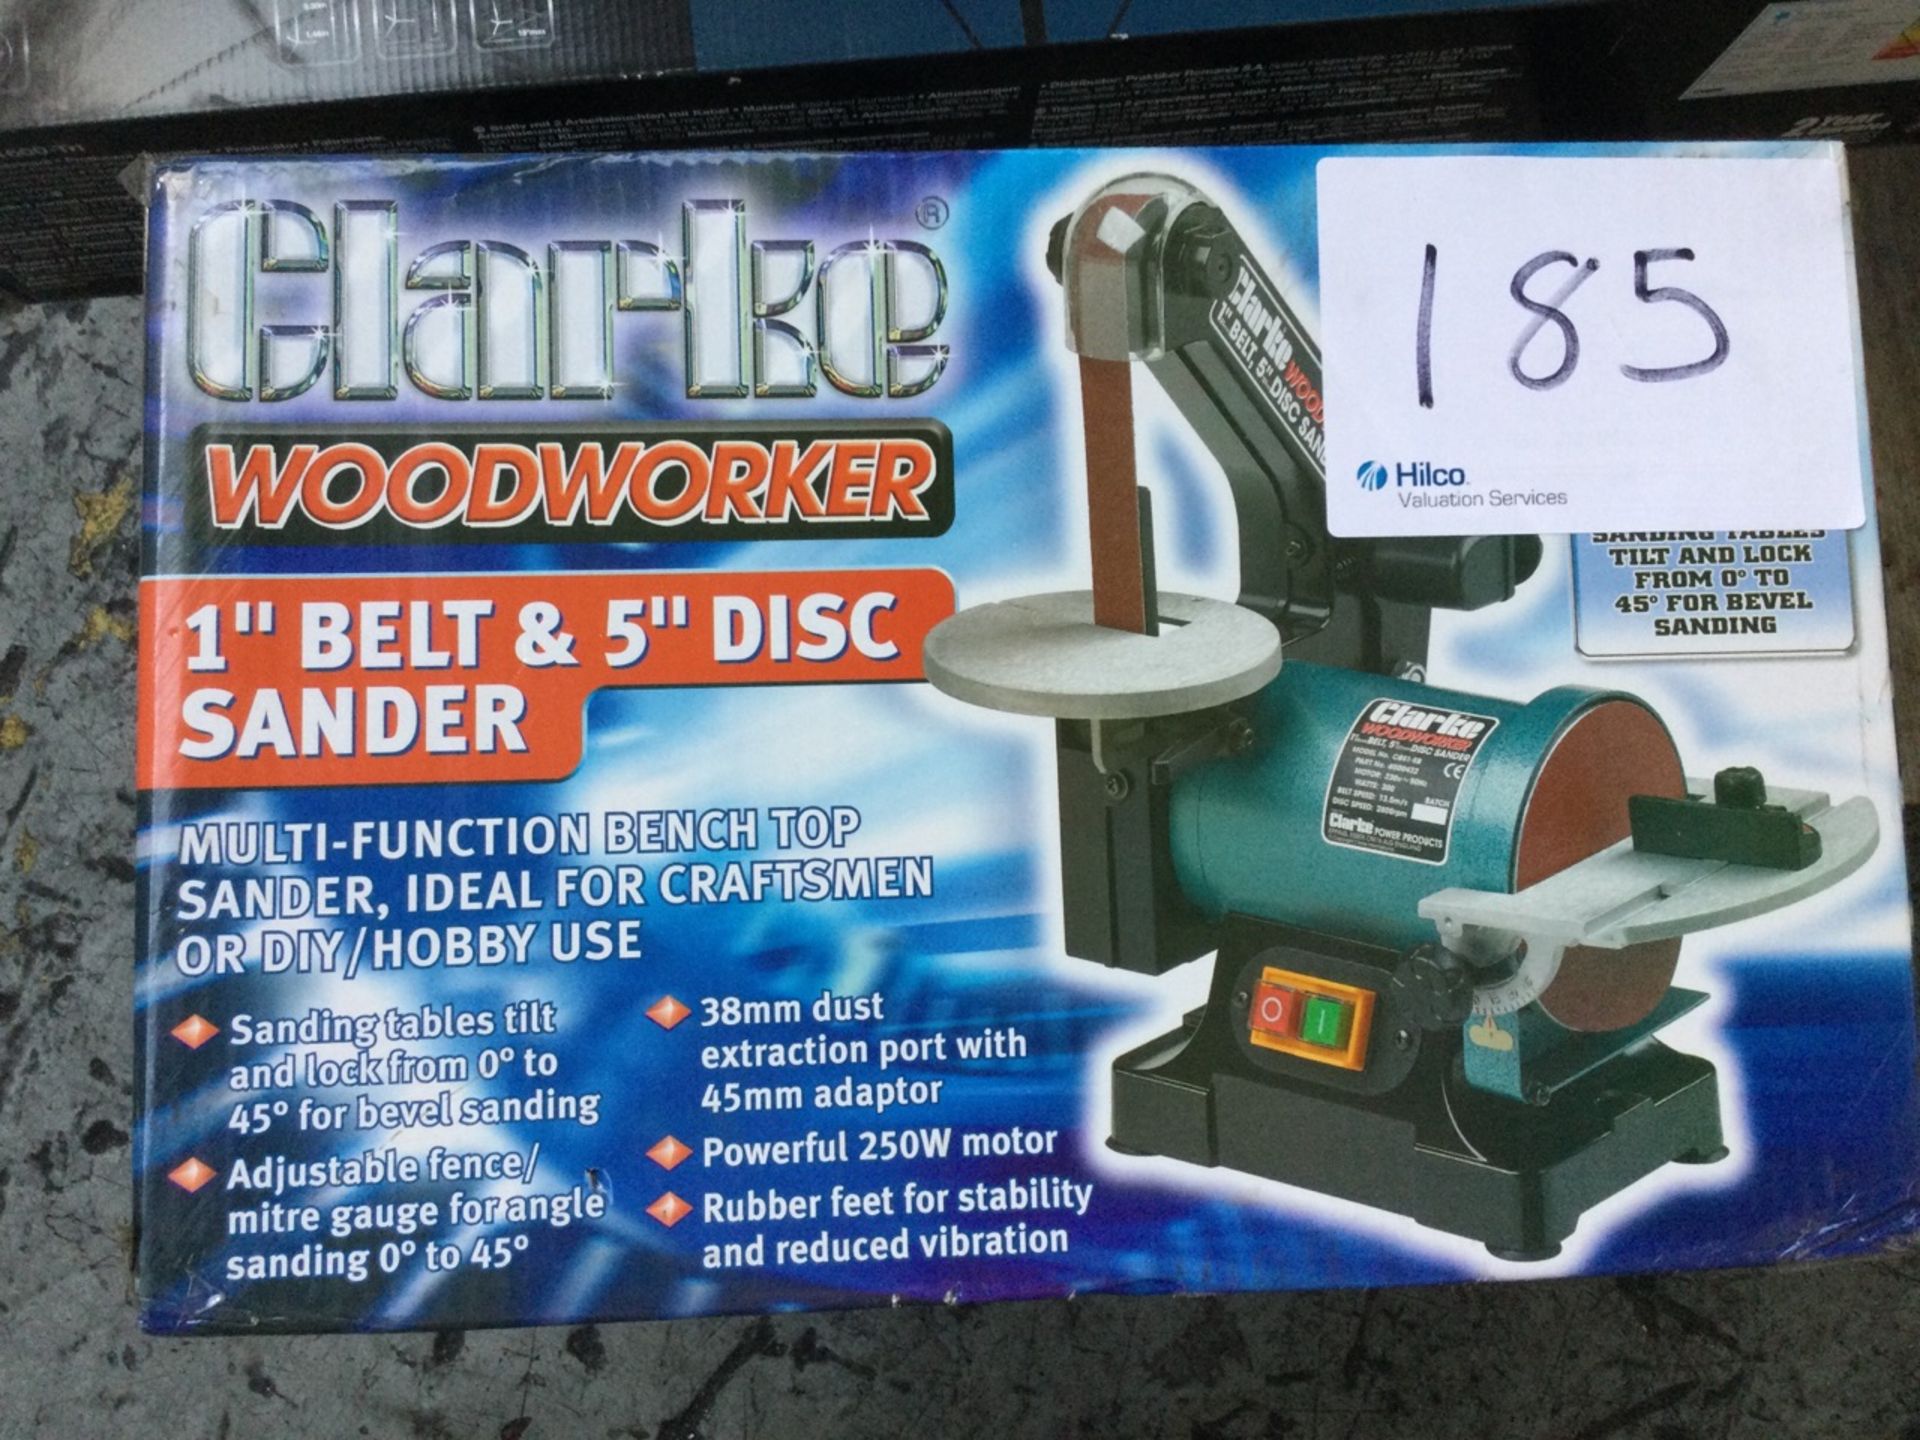 1 Clarke , Woodworker 1” Belt And 5” Disc Sander ( Boxed And Unused)